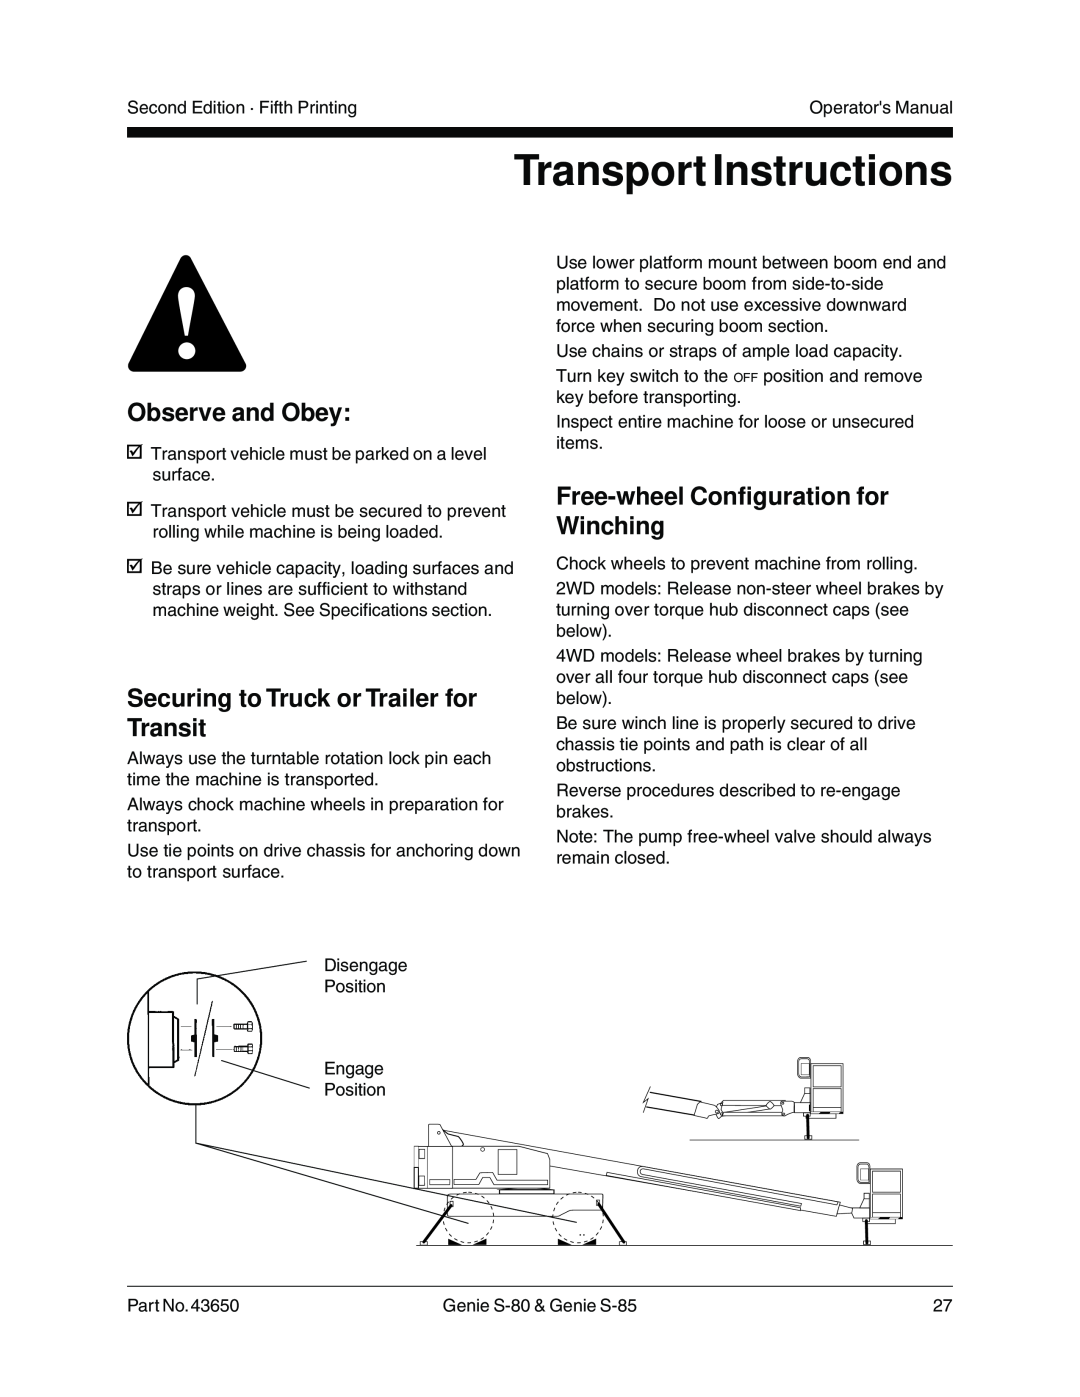 Genie 43650, S-80 Transport Instructions, Securing to Truck or Trailer for Transit, Free-wheelConfiguration for Winching 